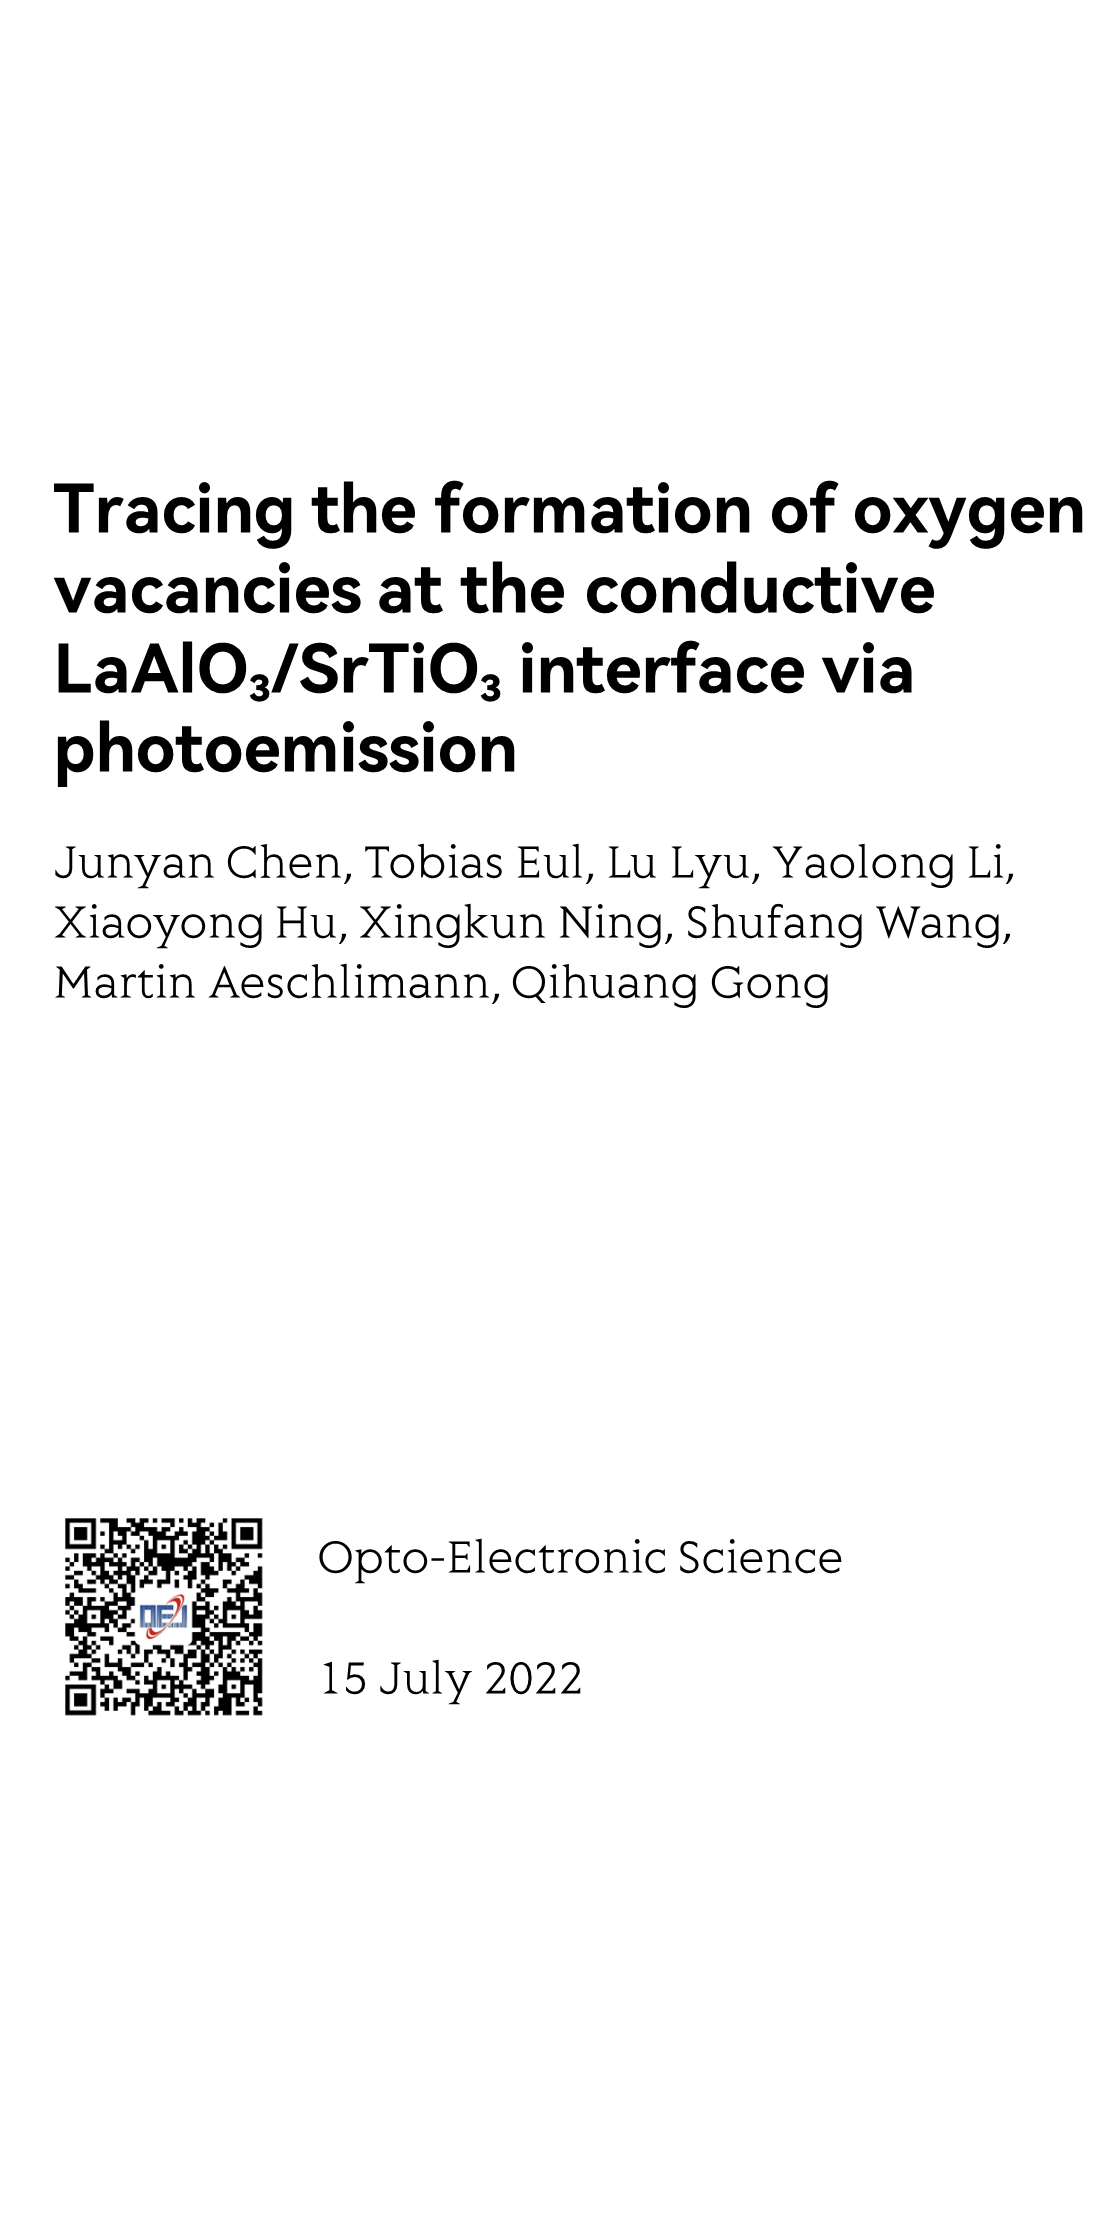 Tracing the formation of oxygen vacancies at the conductive LaAlO₃/SrTiO₃ interface via photoemission_1